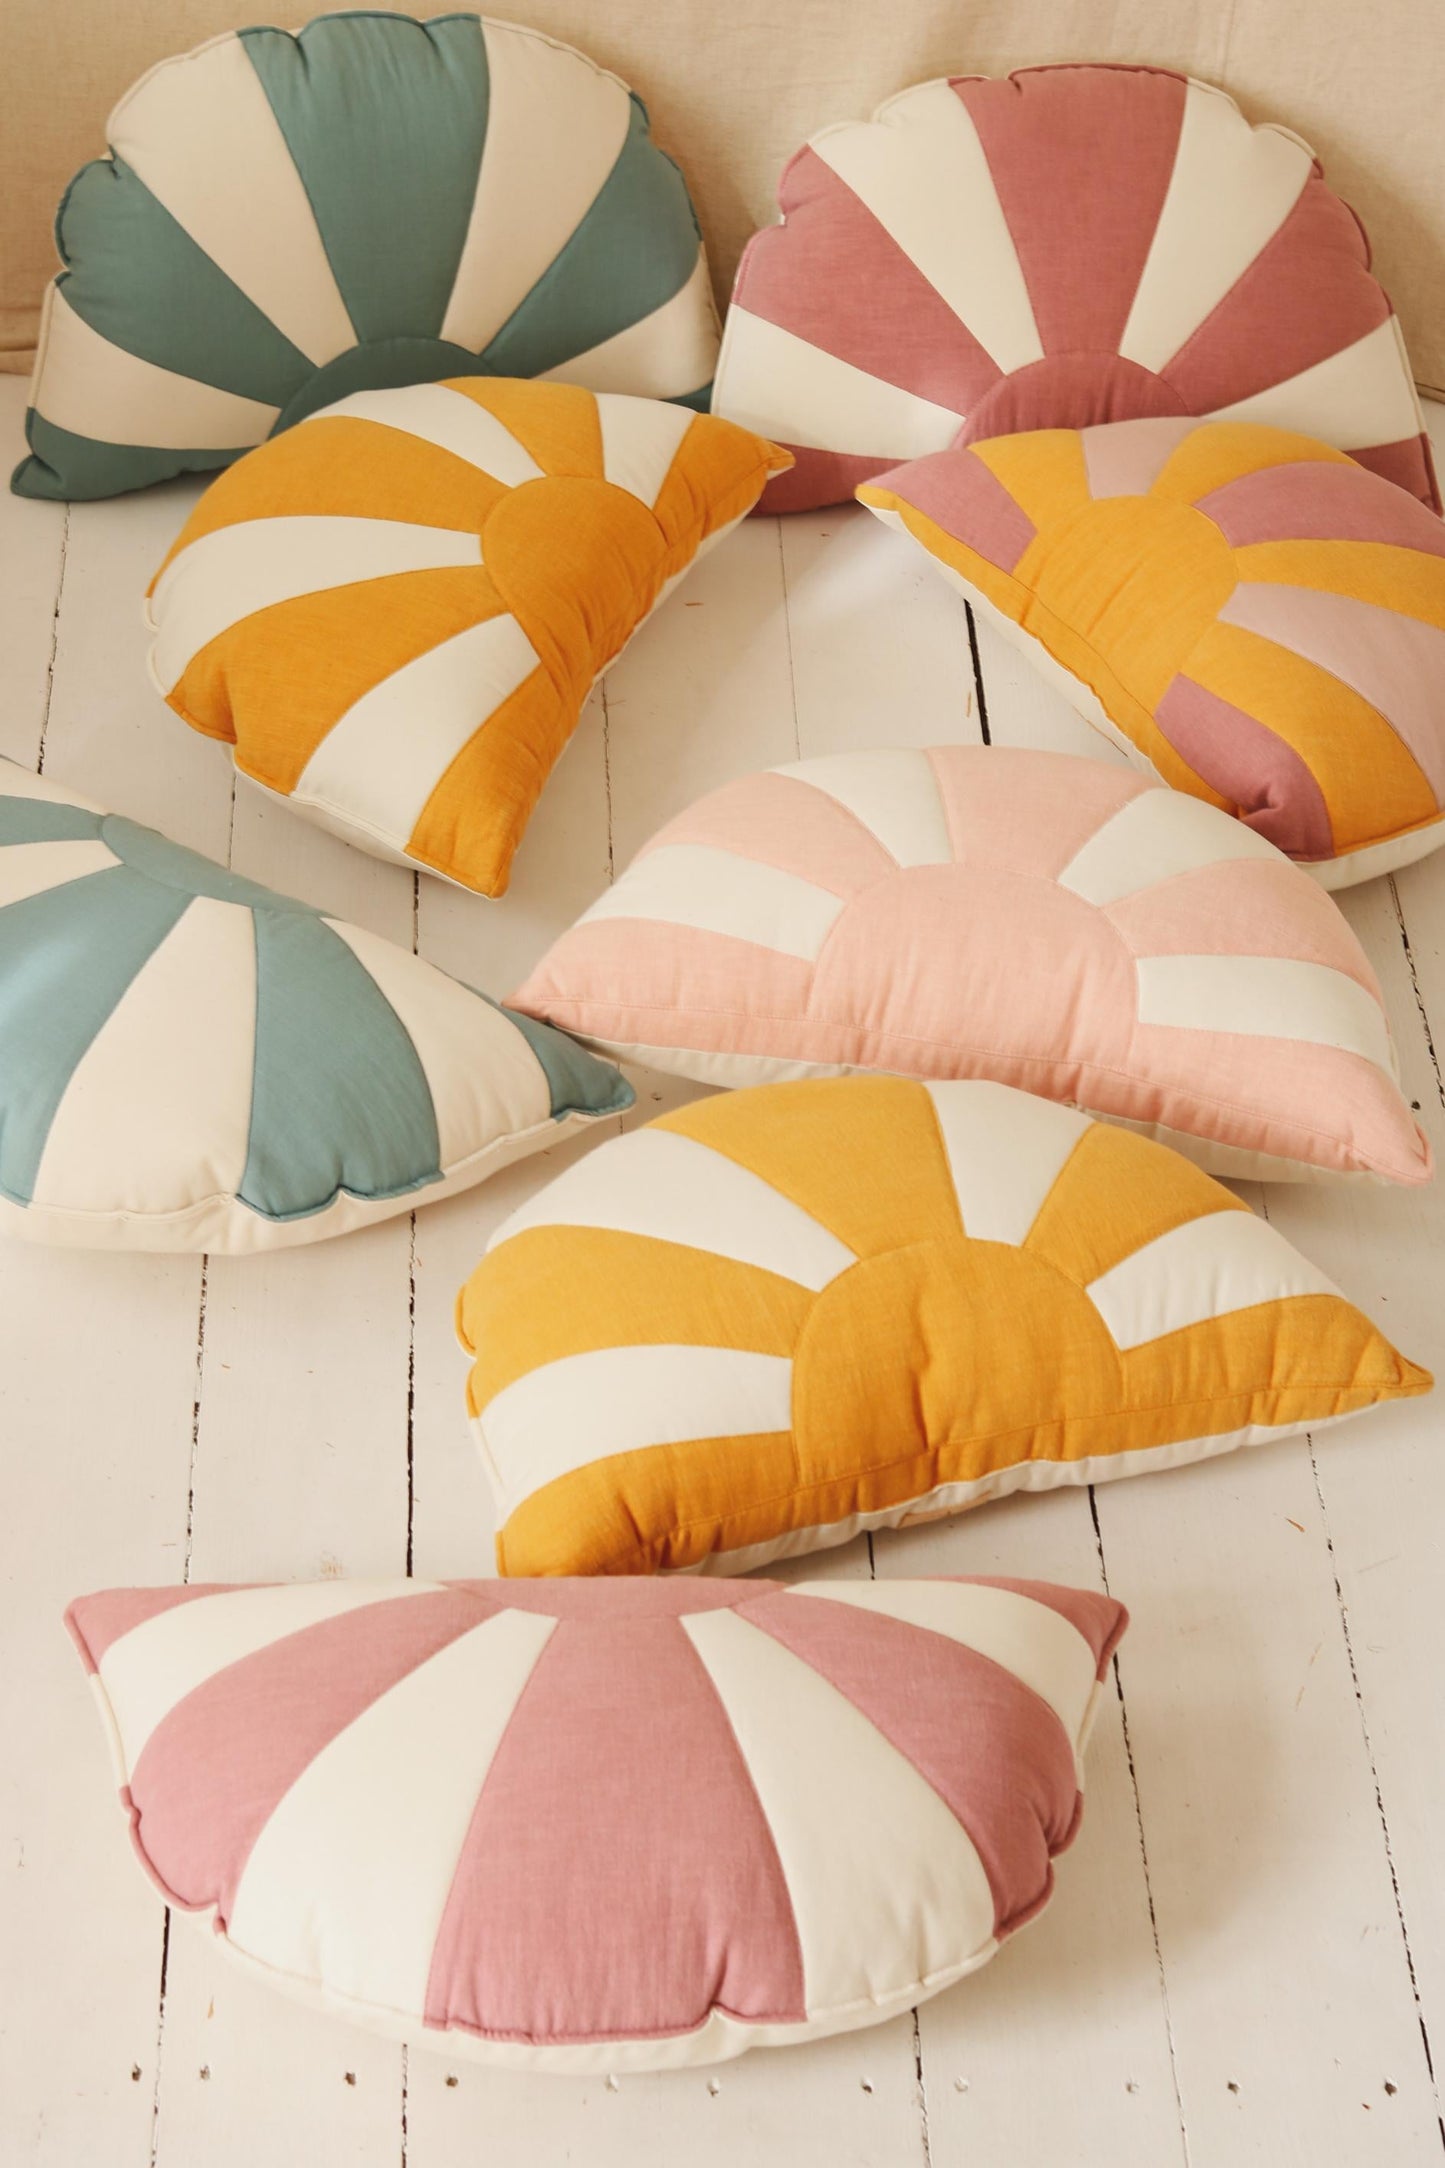 Sun Pillow “Dinner in Sausalito” by Moi Mili